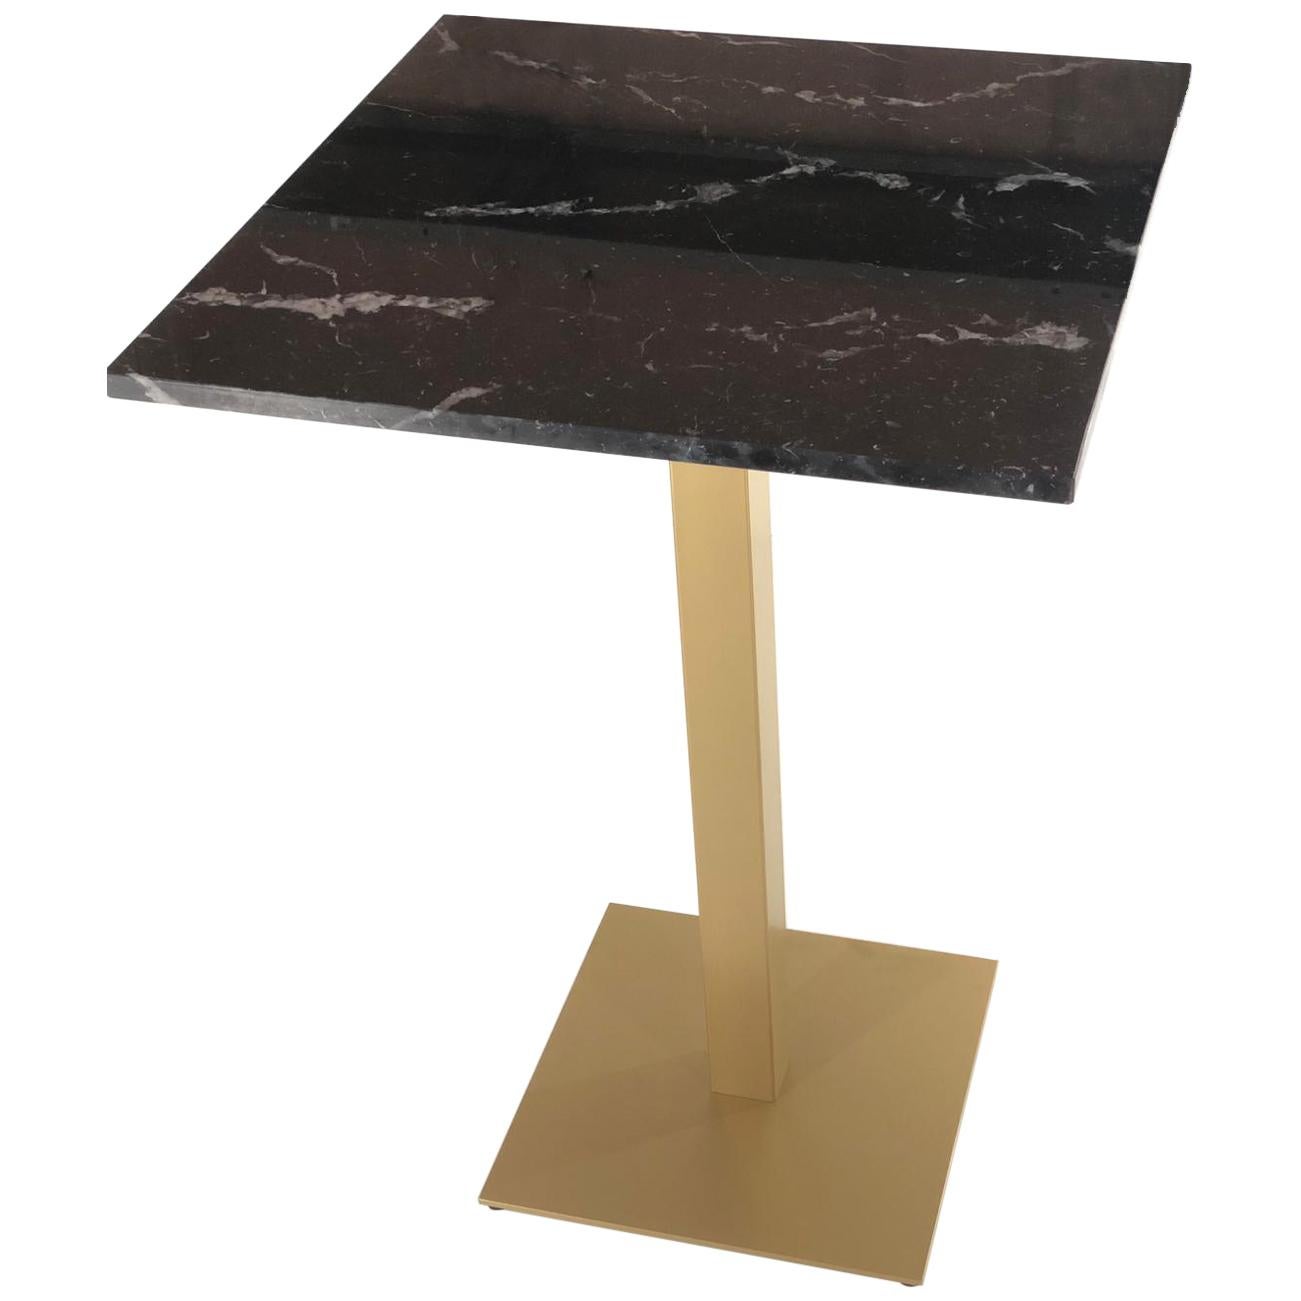 New Bistro High Table in Gilded Wrought Iron with Black Marble Top. Indoor & Out For Sale